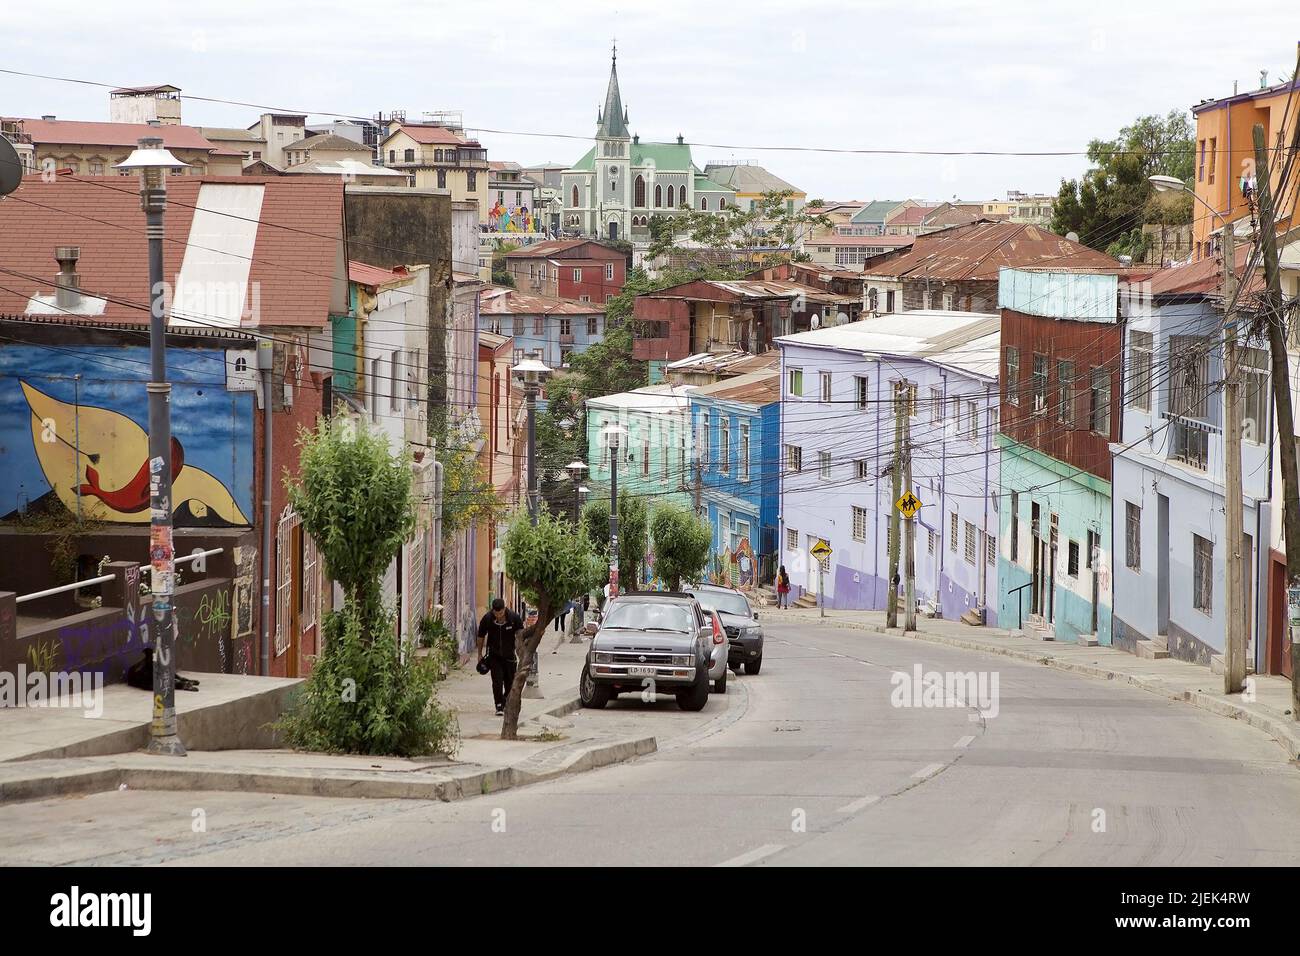 Street in Valparaiso, Chile. Valparaiso was declared a World Heritage Site by UNESCO in 2003. Stock Photo